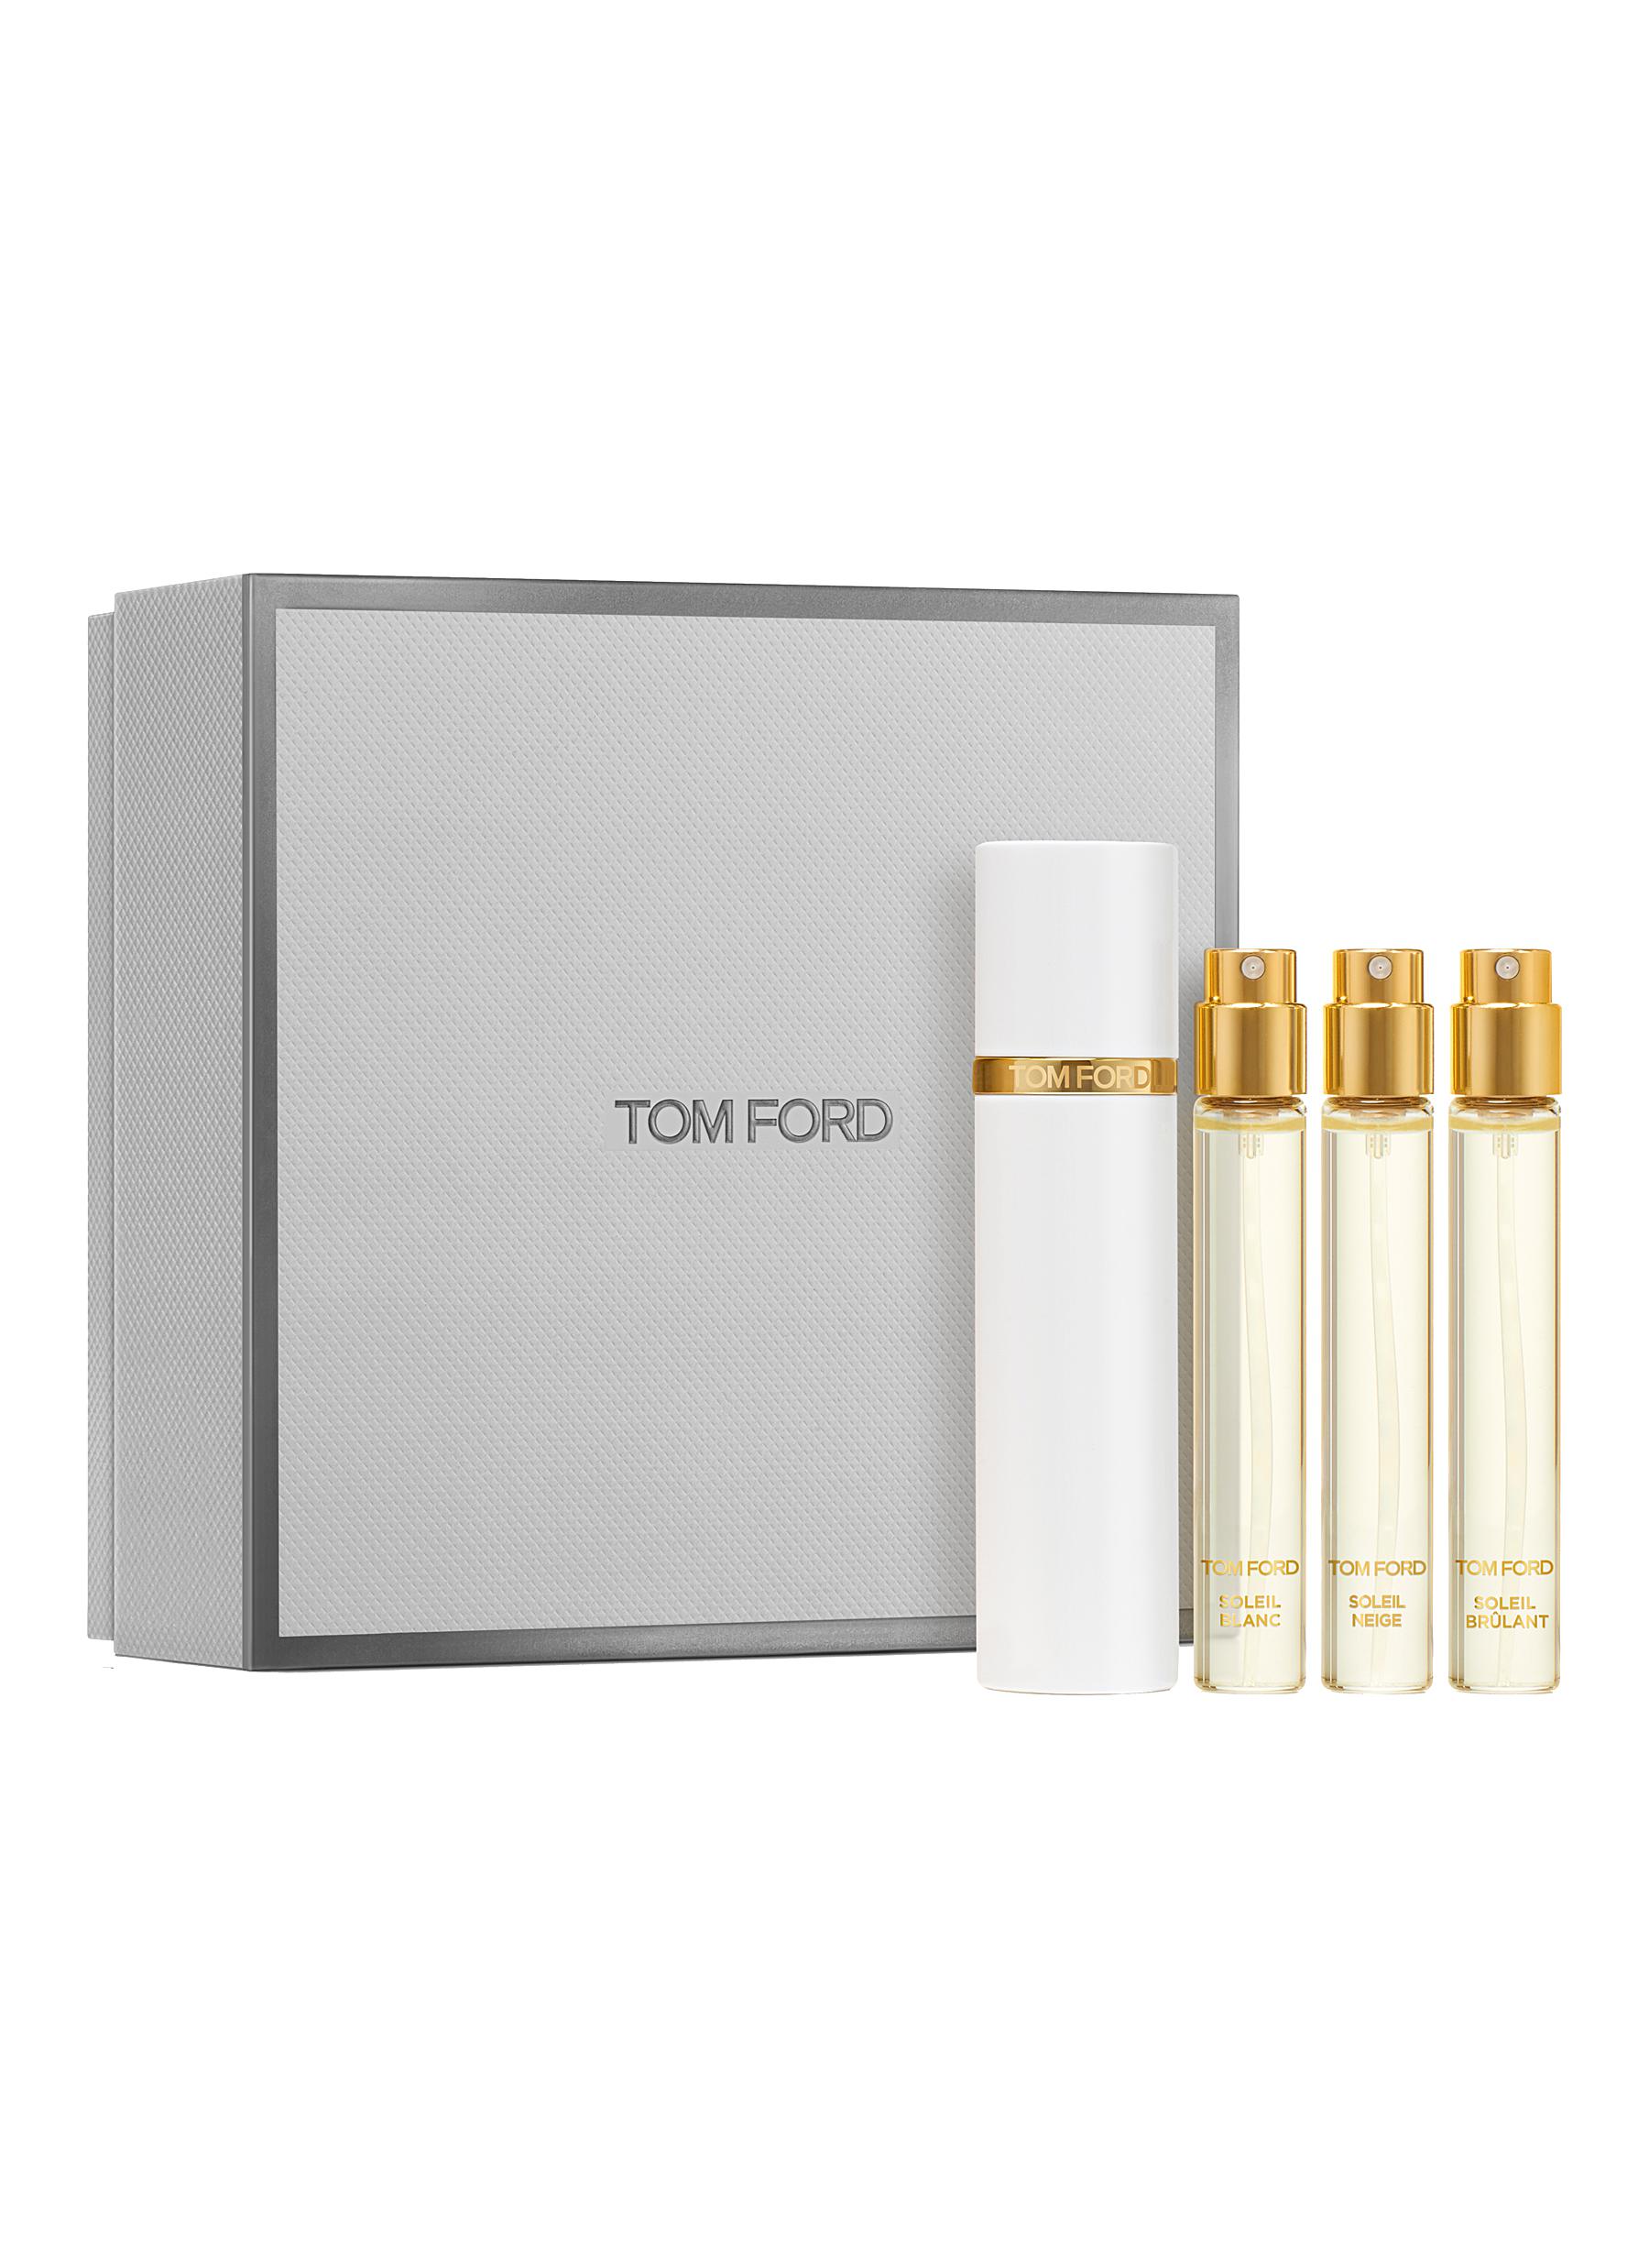 TOM FORD BEAUTY | Private Blend Soleil Atomizer Set | Beauty | Lane Crawford